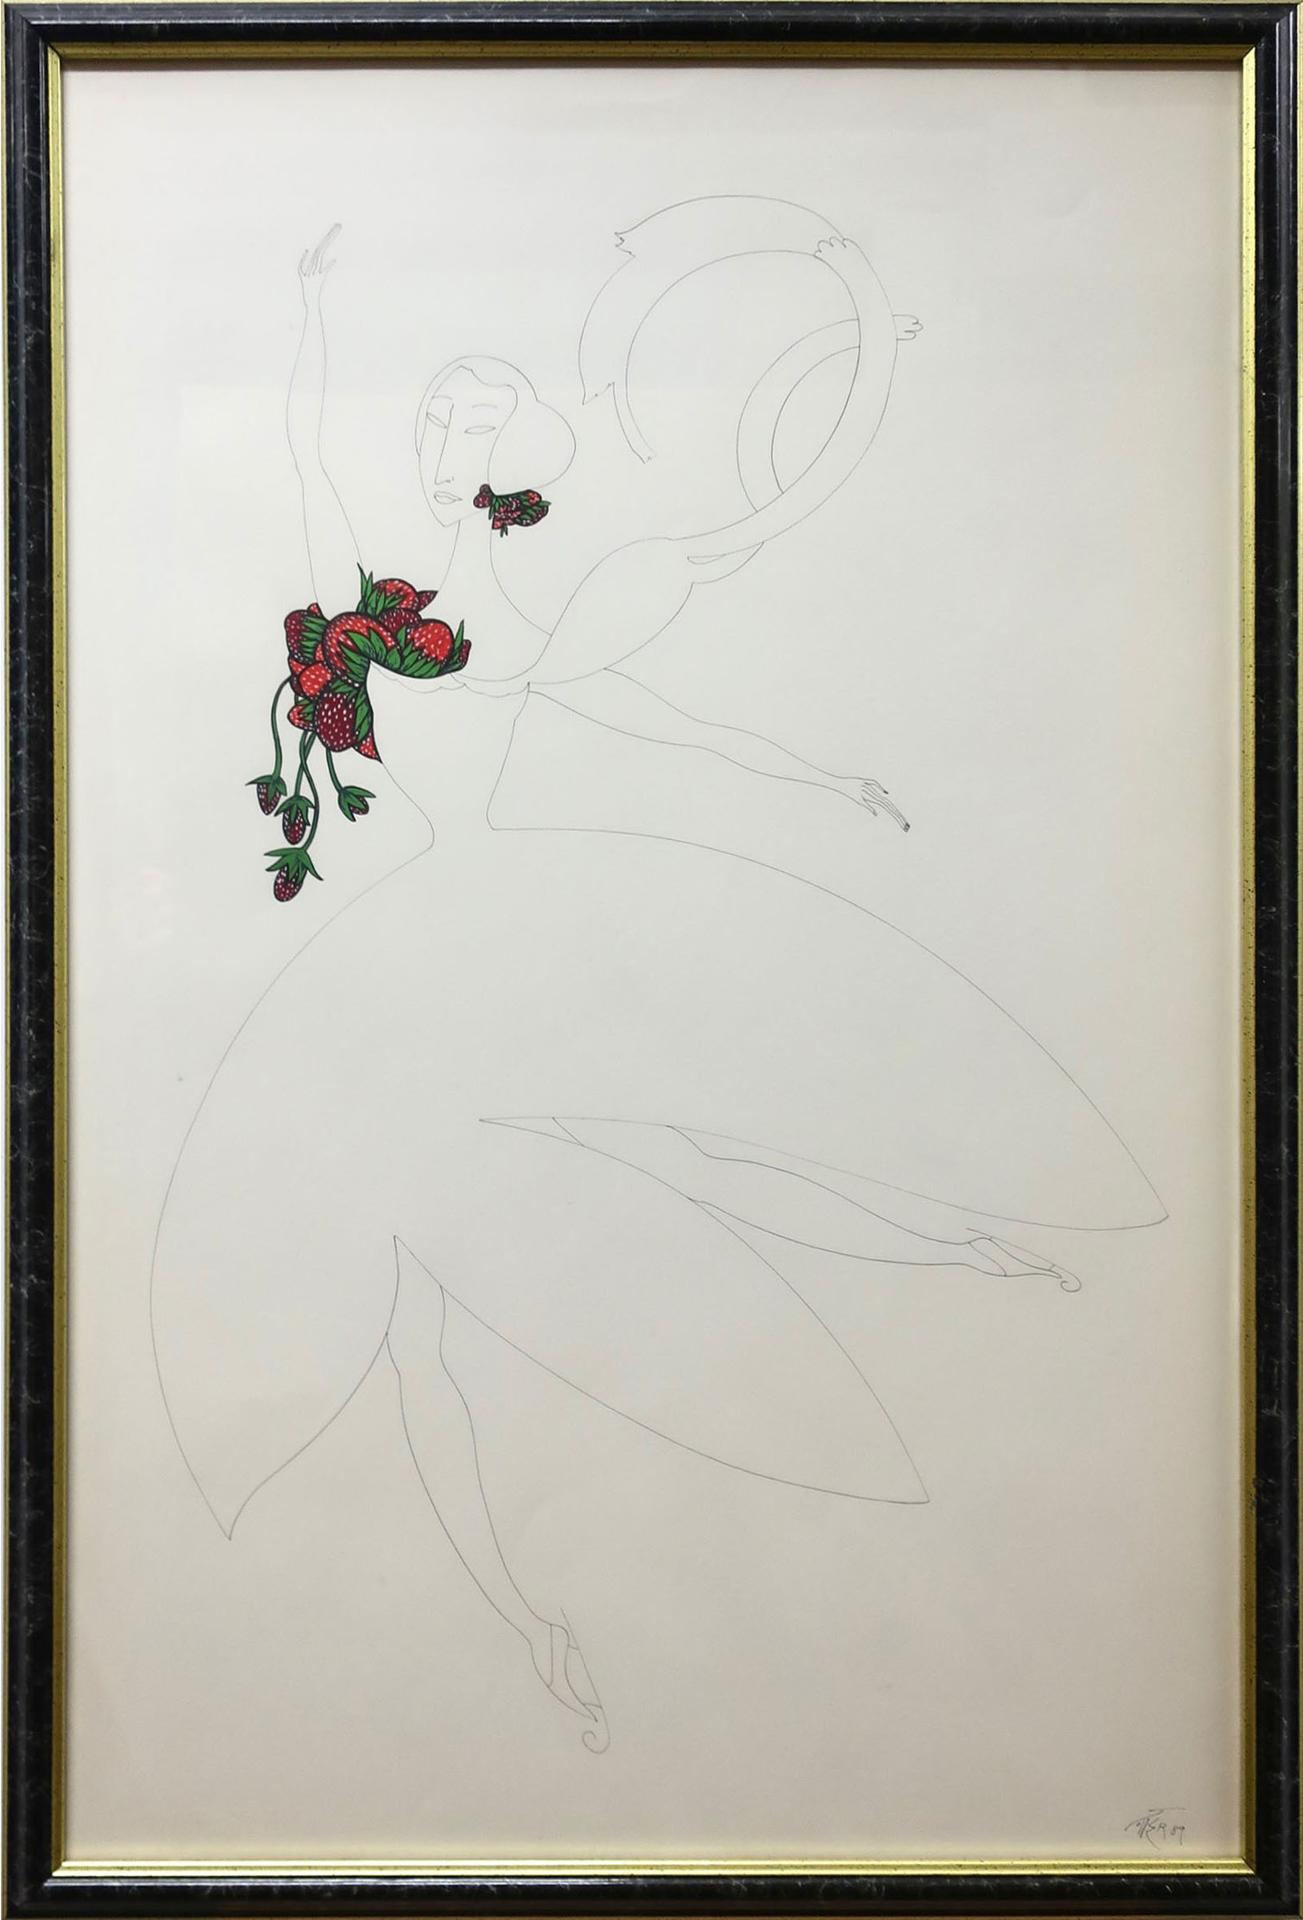 Toller Cranston (1949-2015) - Untitled (Strawberry Skating Queen)